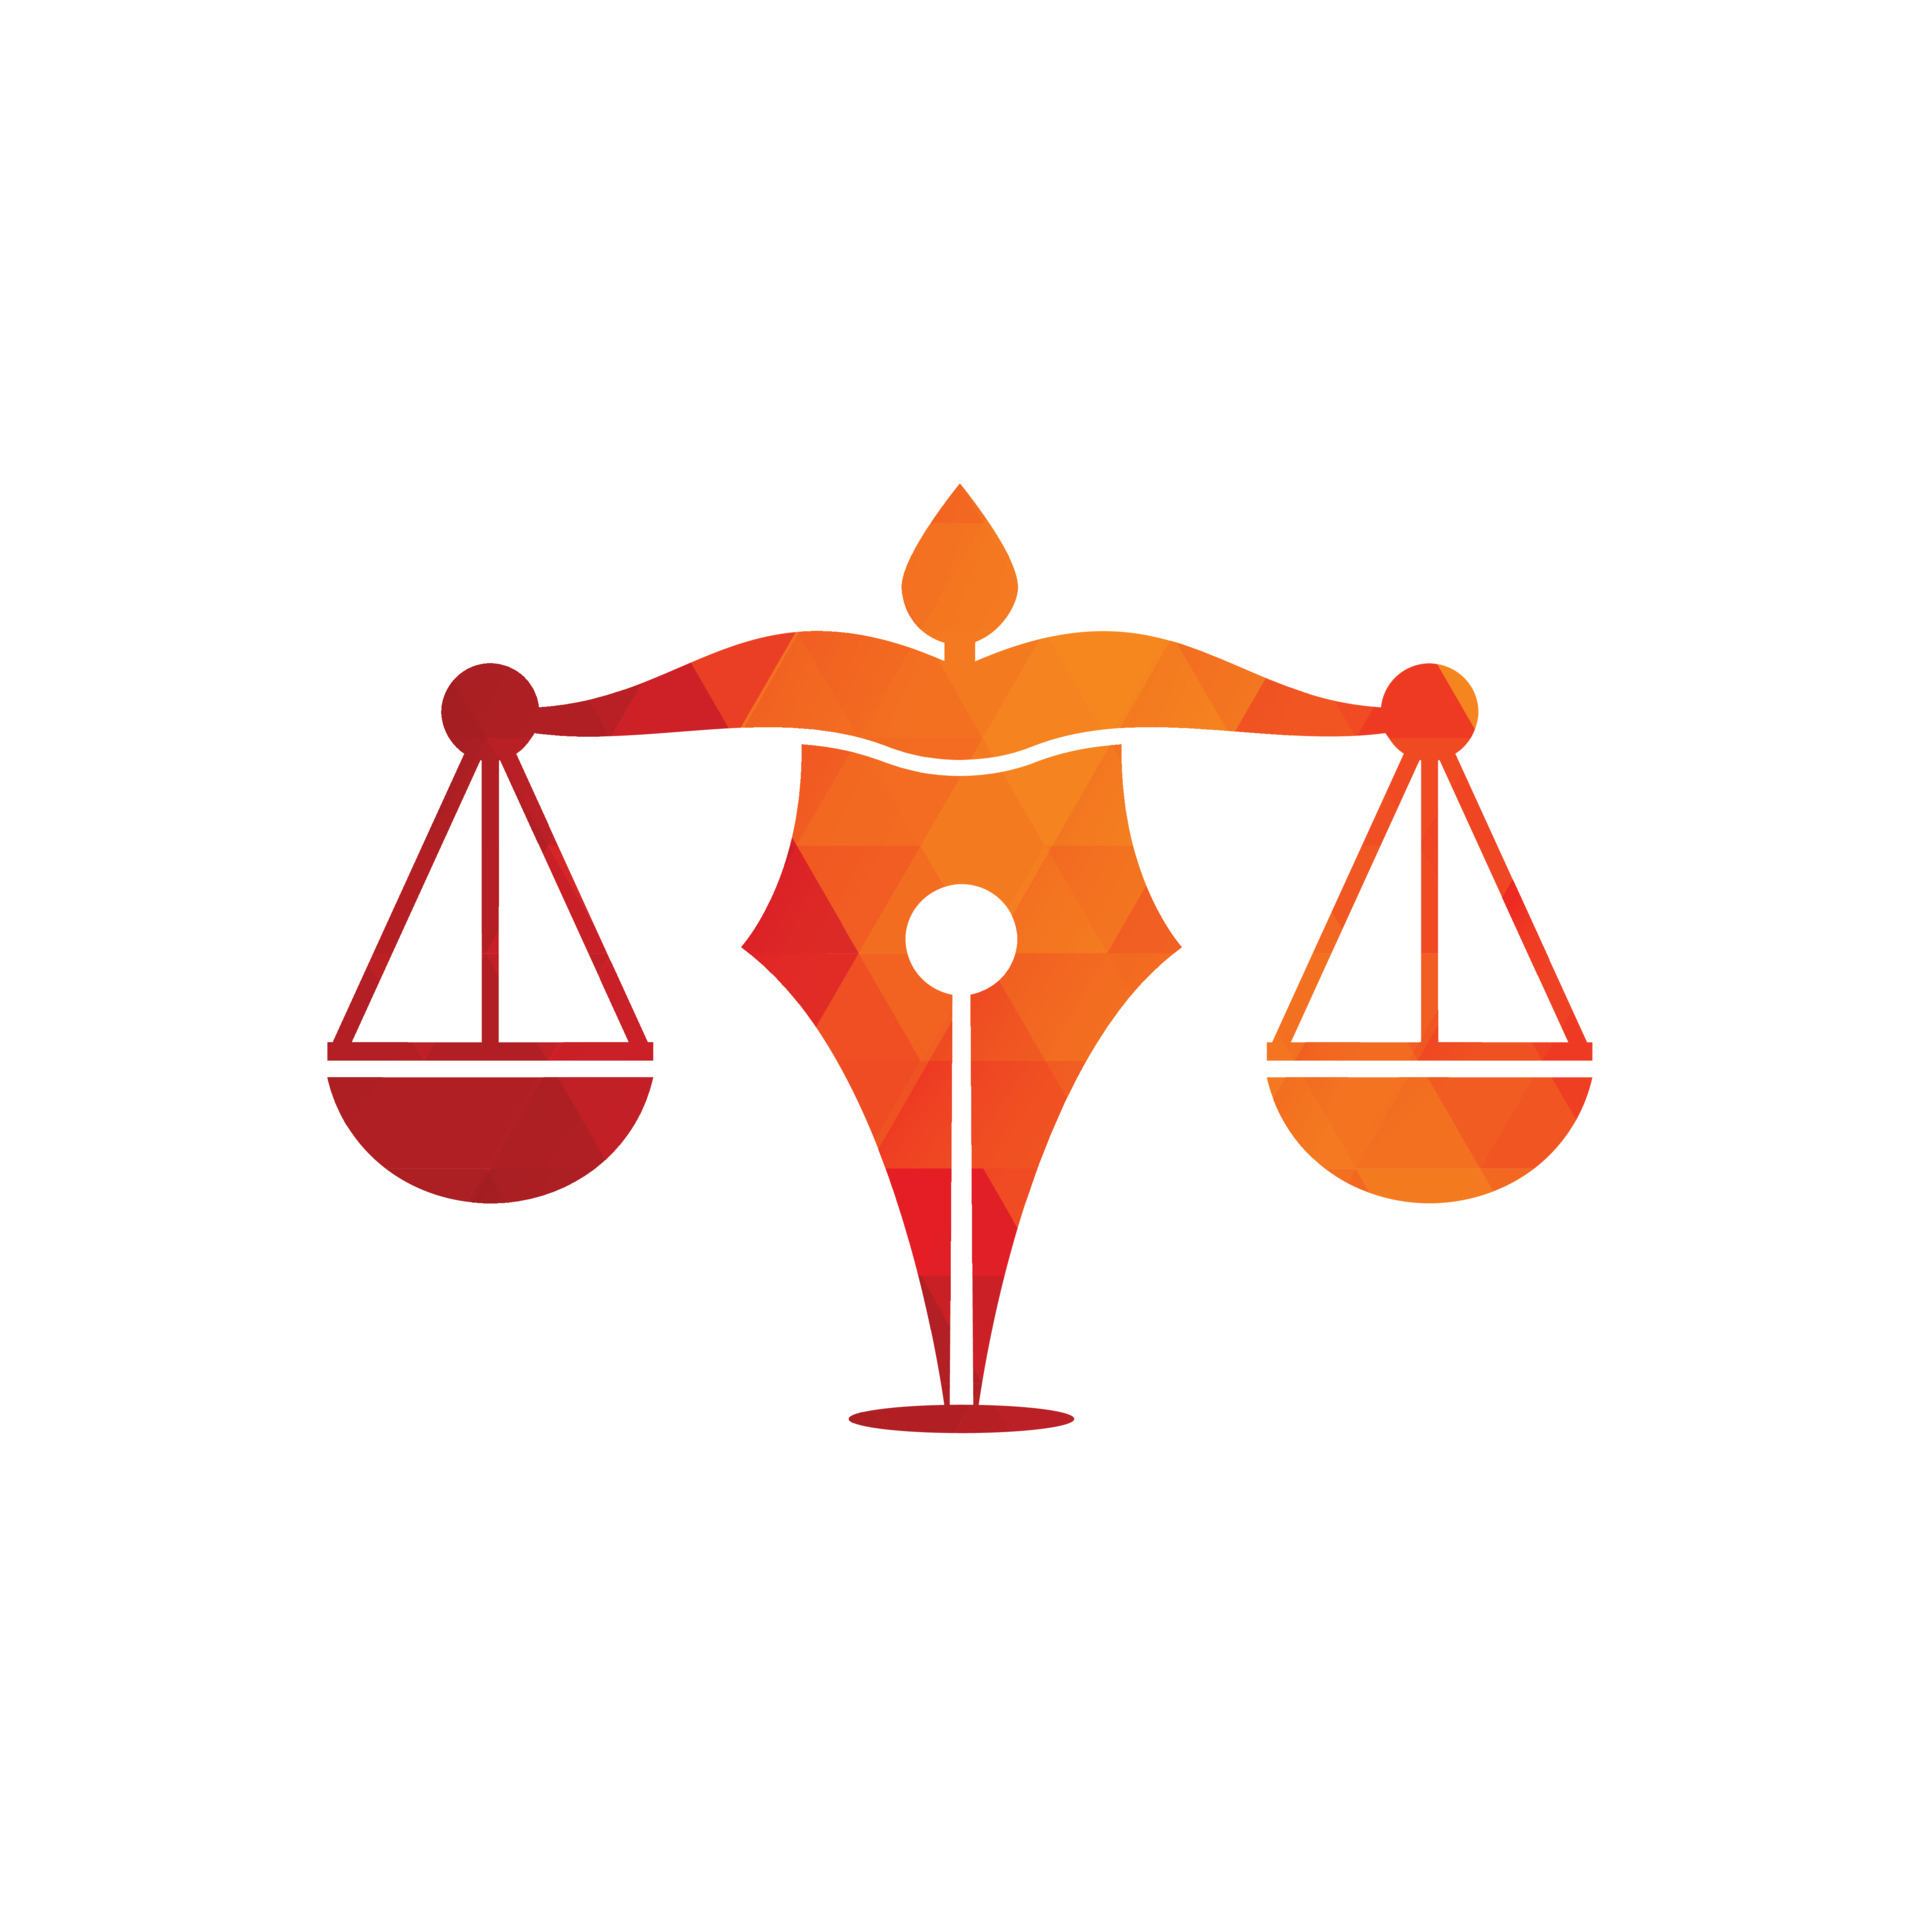 Law Logo Vector With Judicial Balance Symbolic Of Justice Scale In A Pen  Nib Stock Illustration - Download Image Now - iStock